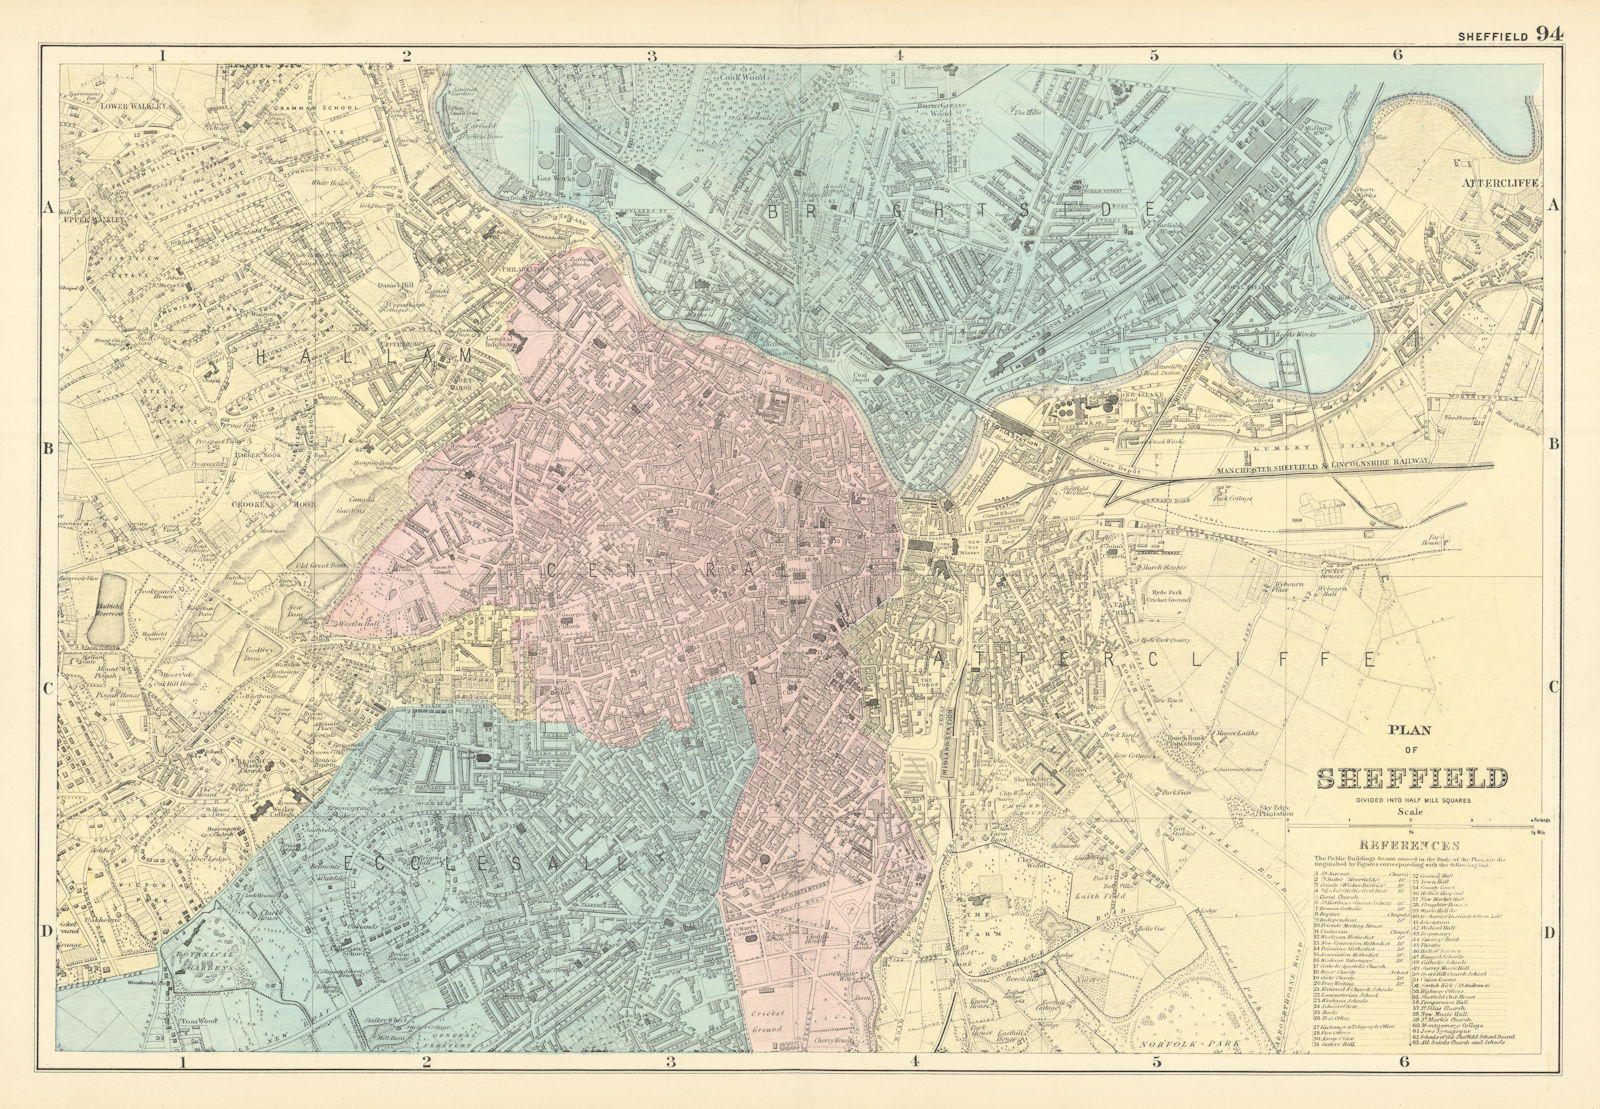 Associate Product SHEFFIELD town city plan Attercliffe Ecclesall Brightside Hallam. BACON 1891 map